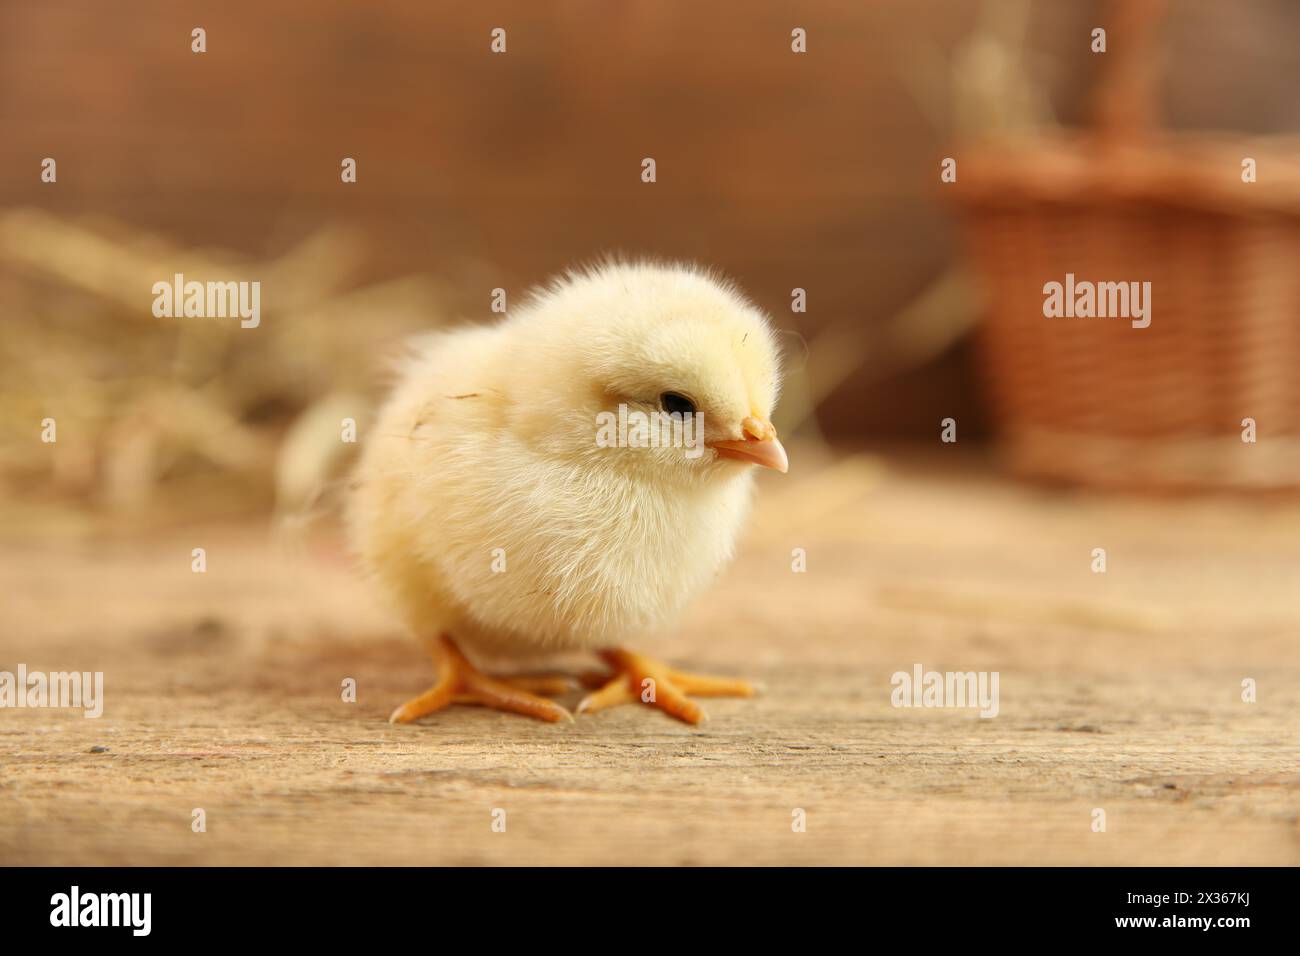 Cute chick on wooden table. Baby animal Stock Photo